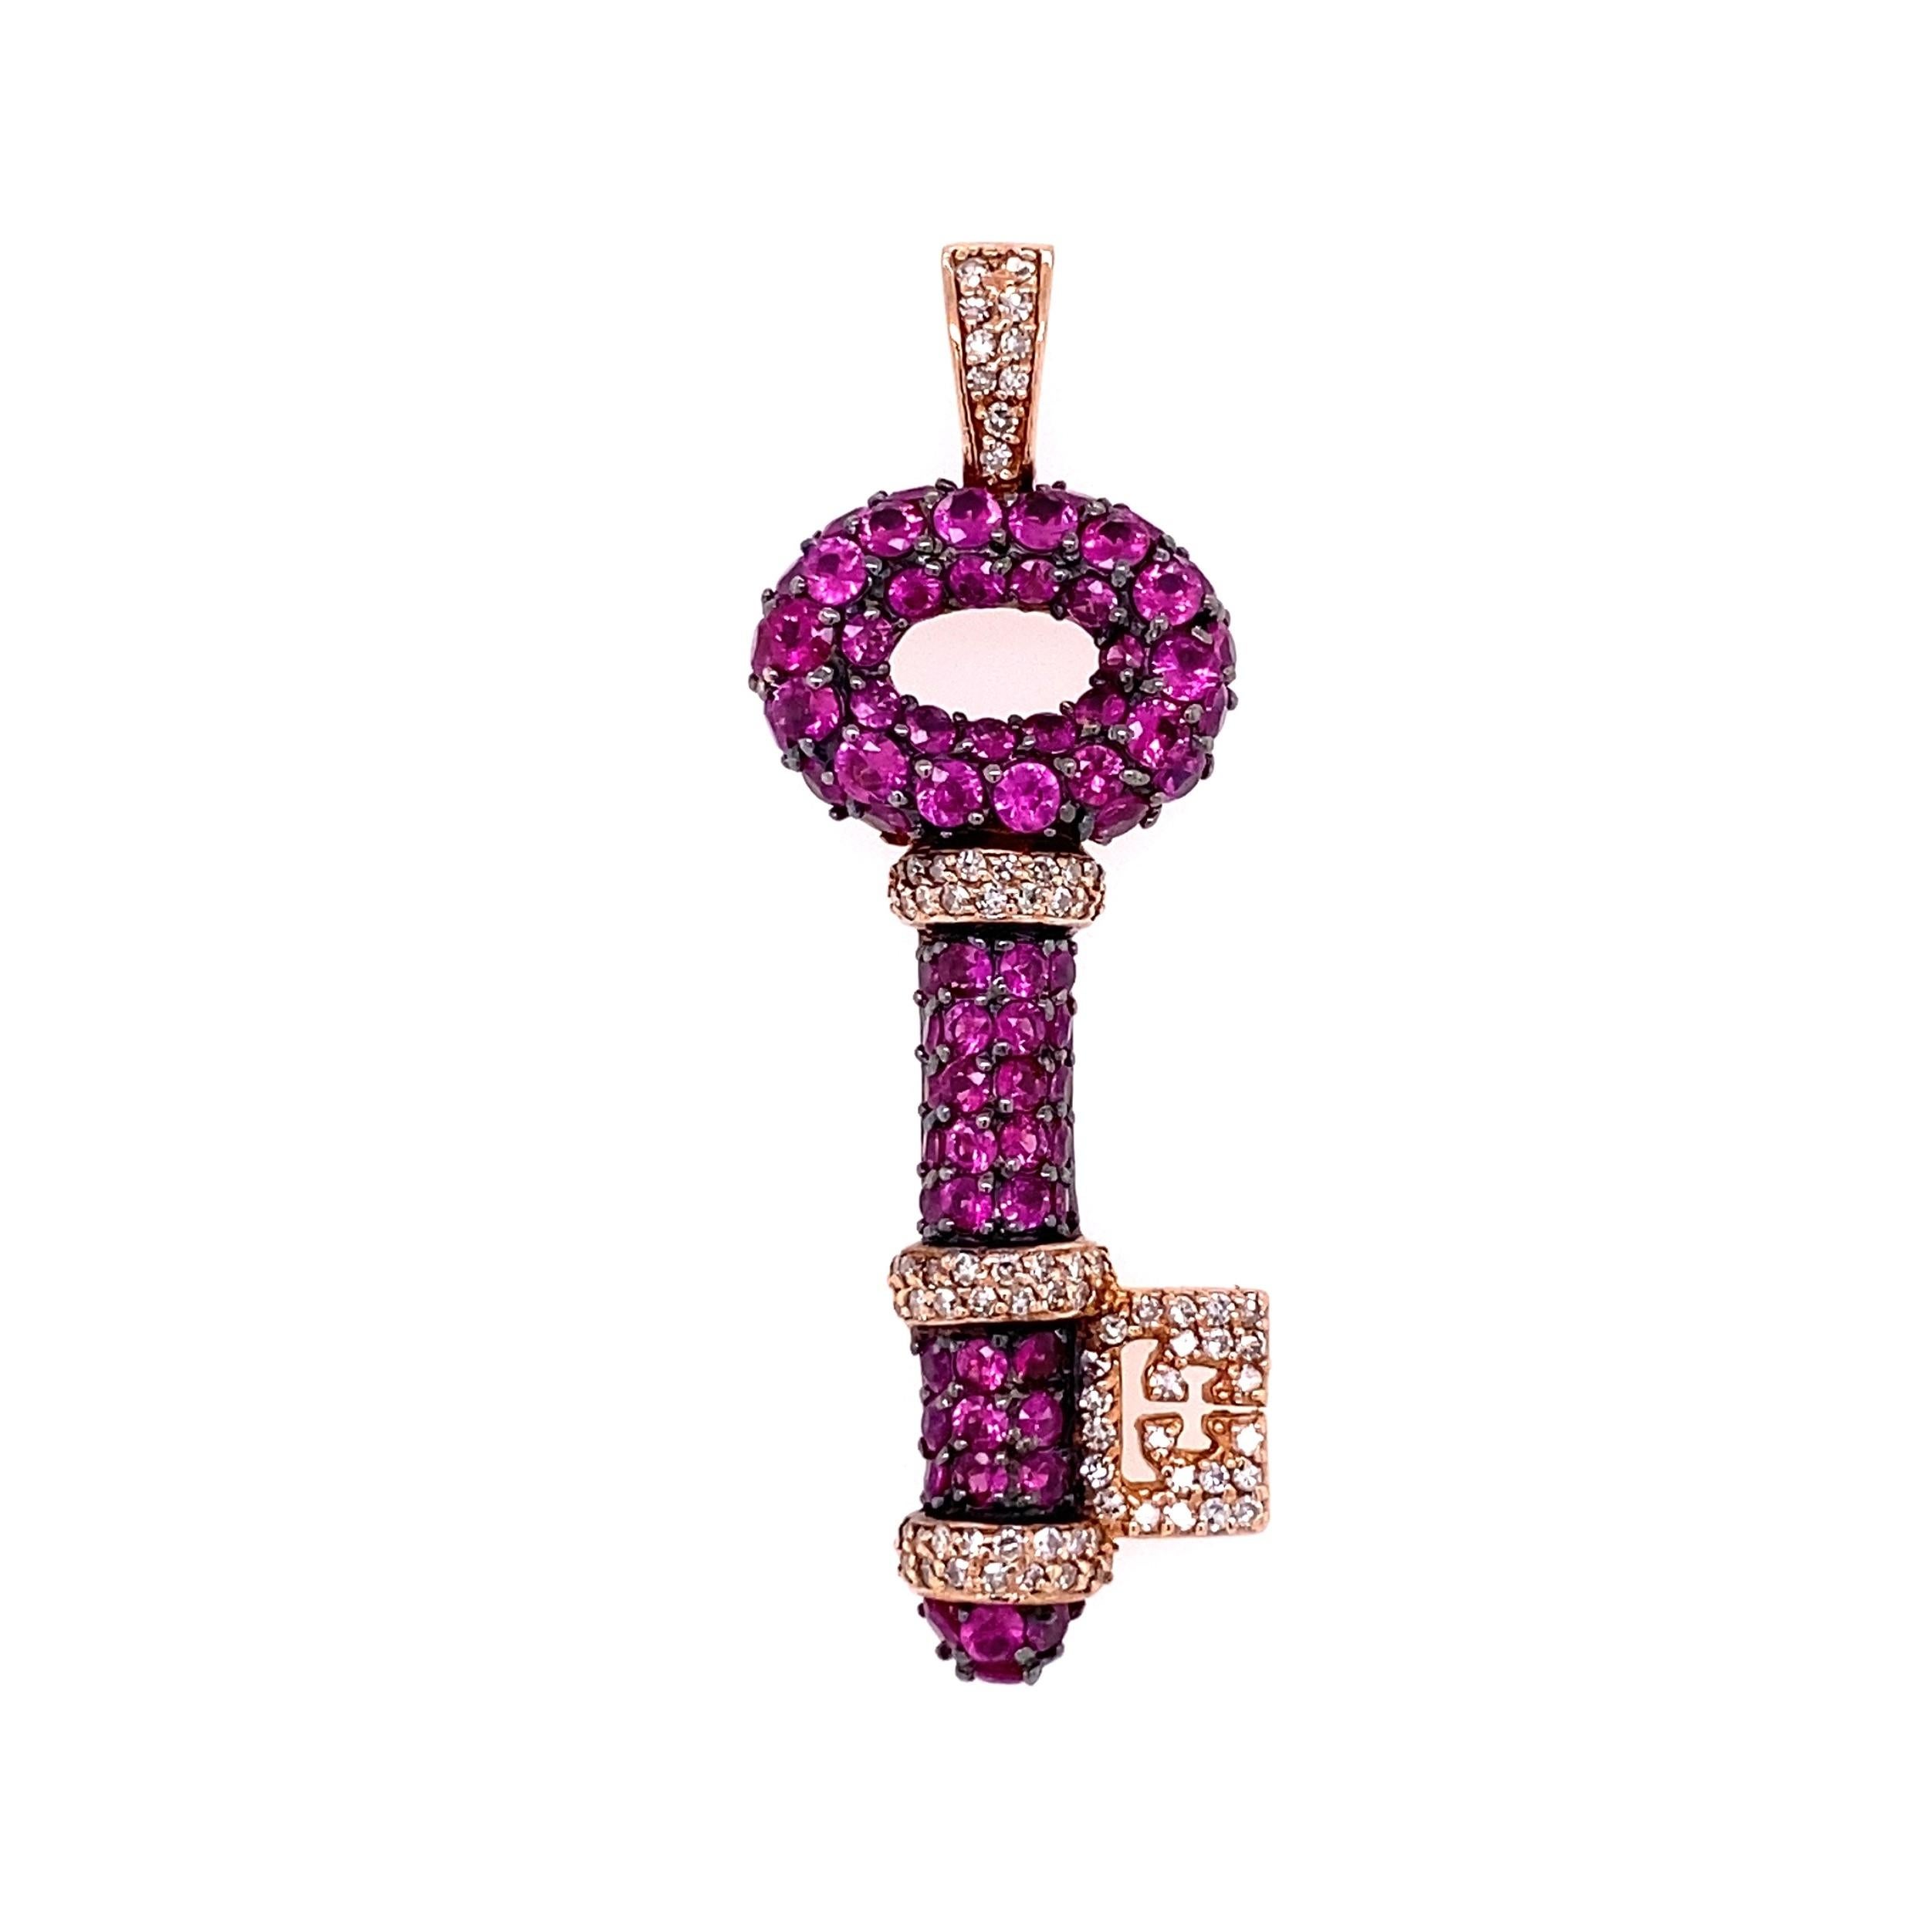 Simply Beautiful! Finely Detailed Designer EFFY Ruby encrusted Open Key Pendant, set with 2.52tcw Rubies, accented by Diamonds, approx. 0.32tcw. Hand crafted in 14 Karat Rose Gold. Dimensions: 1.75” w x 0.60” h x 0.20” d. This pendant epitomizes